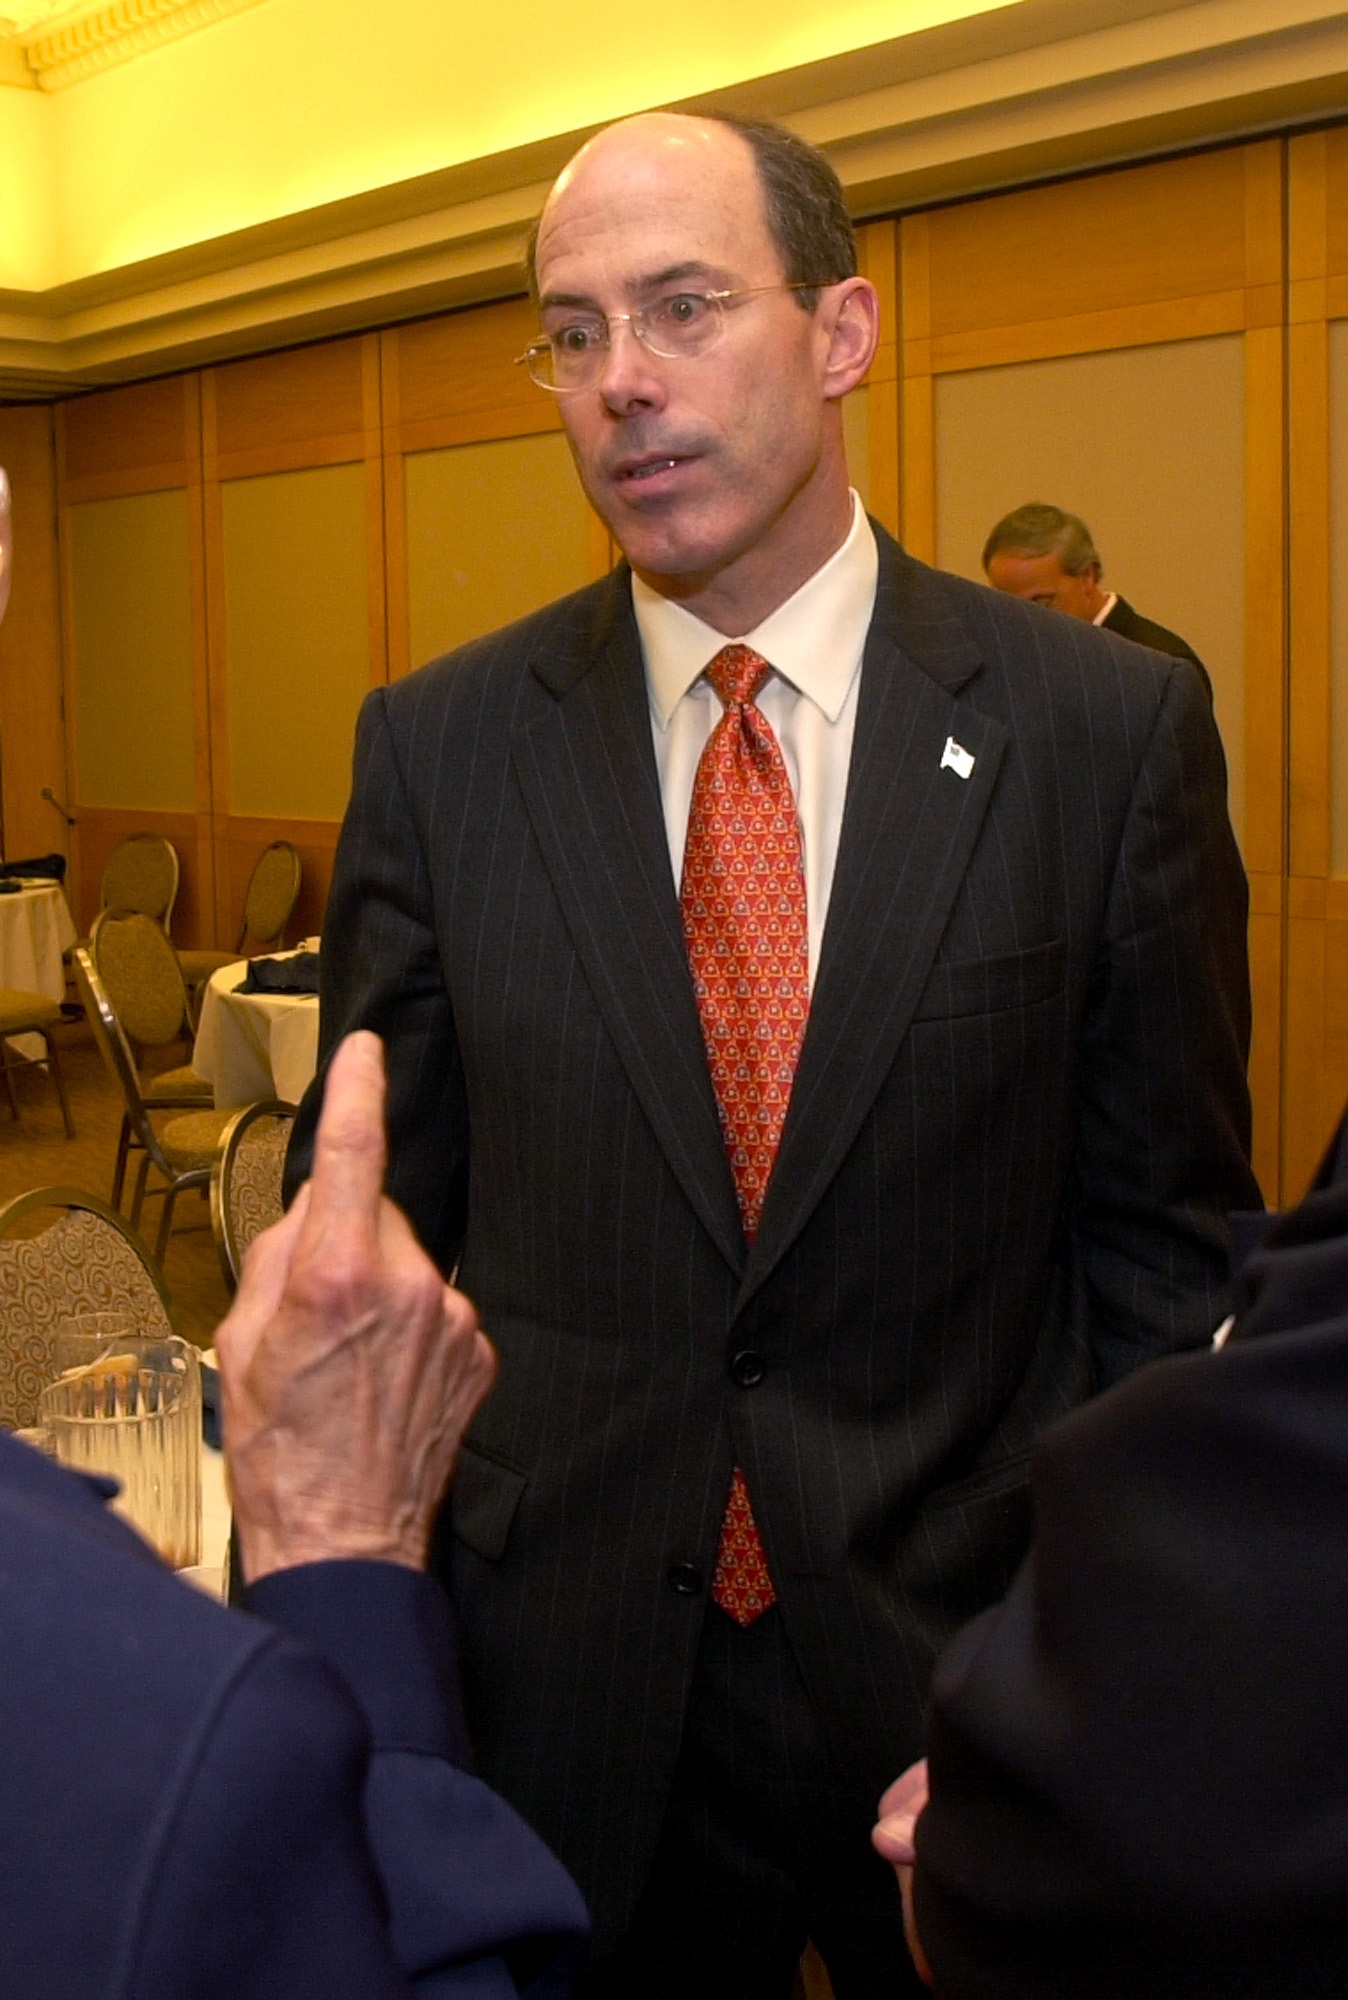 PHOTO: Joseph E. Schmitz, Inspector General of the U.S. Department of Defense, listens to criticism after speaking at the Cleveland City Club, in Cleveland, June 25, 2004. 